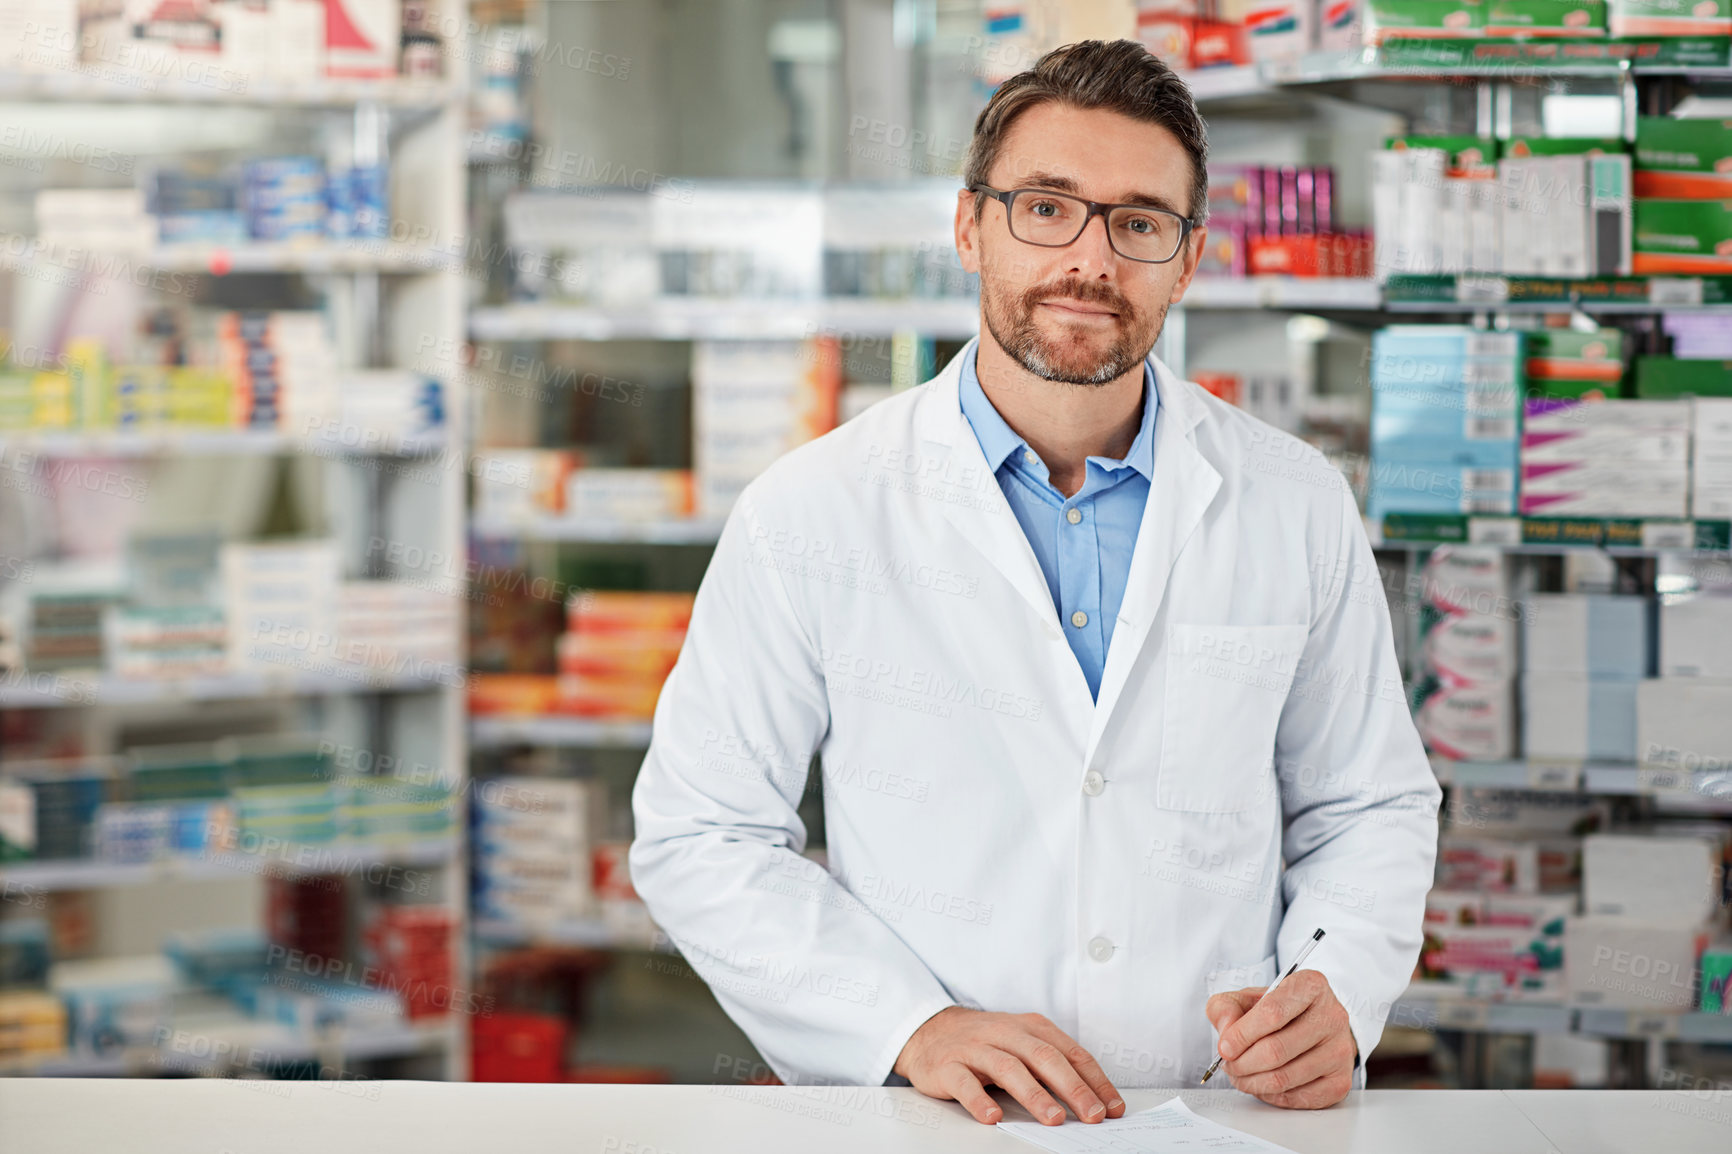 Buy stock photo Pharmacy, writing and pharmacist man in portrait for medicine, product or healthcare insurance document. Trust, help desk and medical professional worker receipt, doctor note or prescription stock